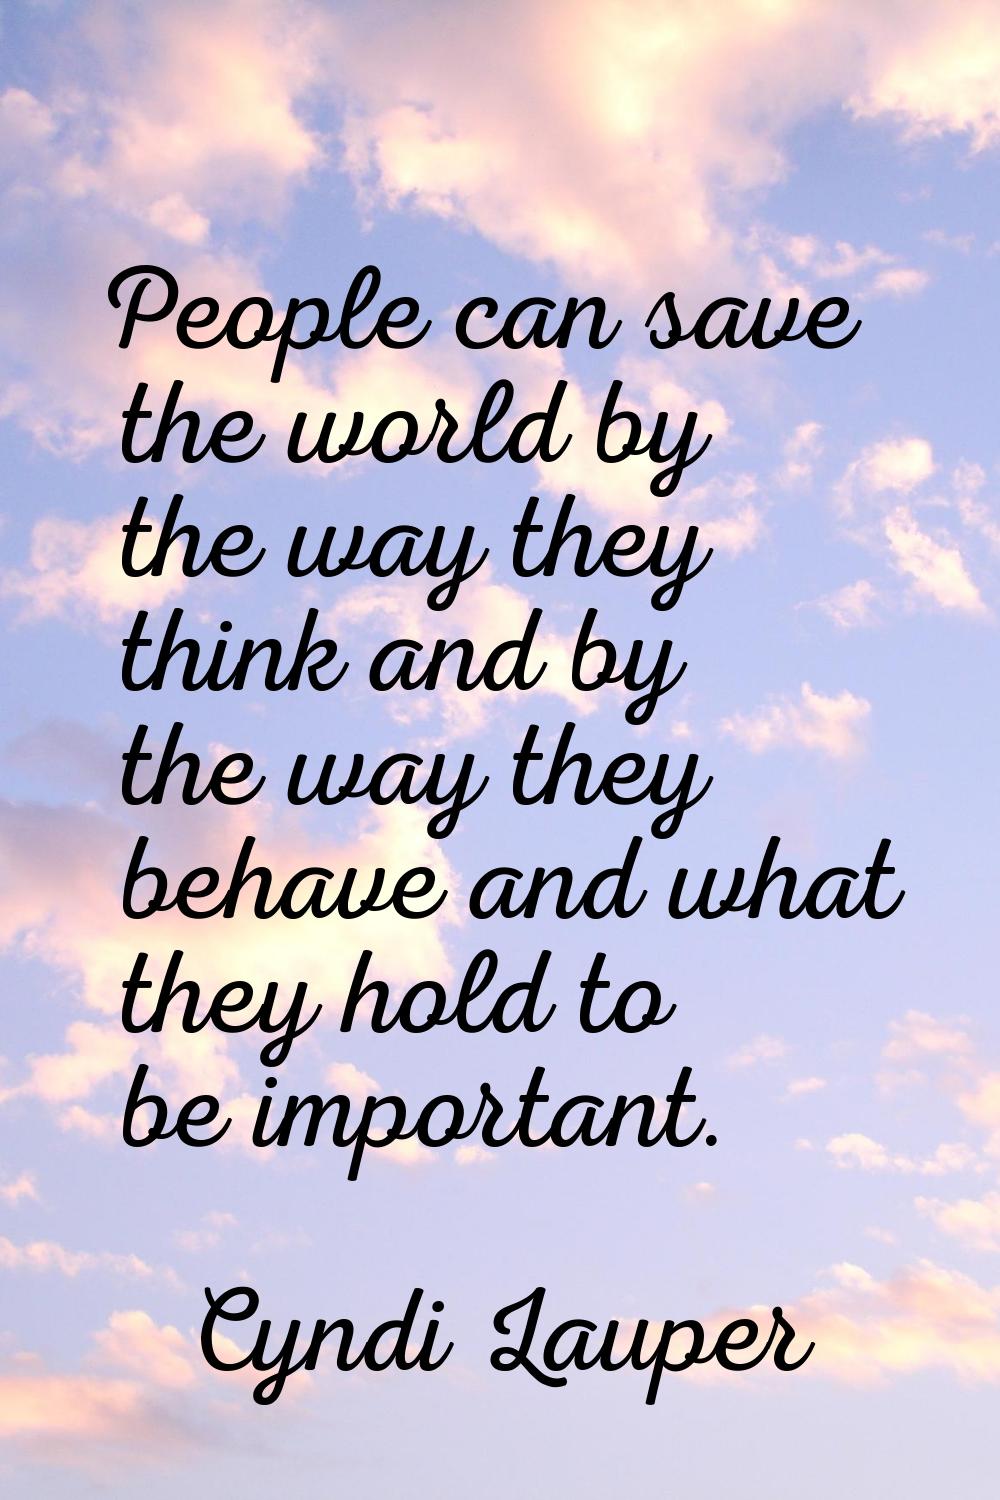 People can save the world by the way they think and by the way they behave and what they hold to be